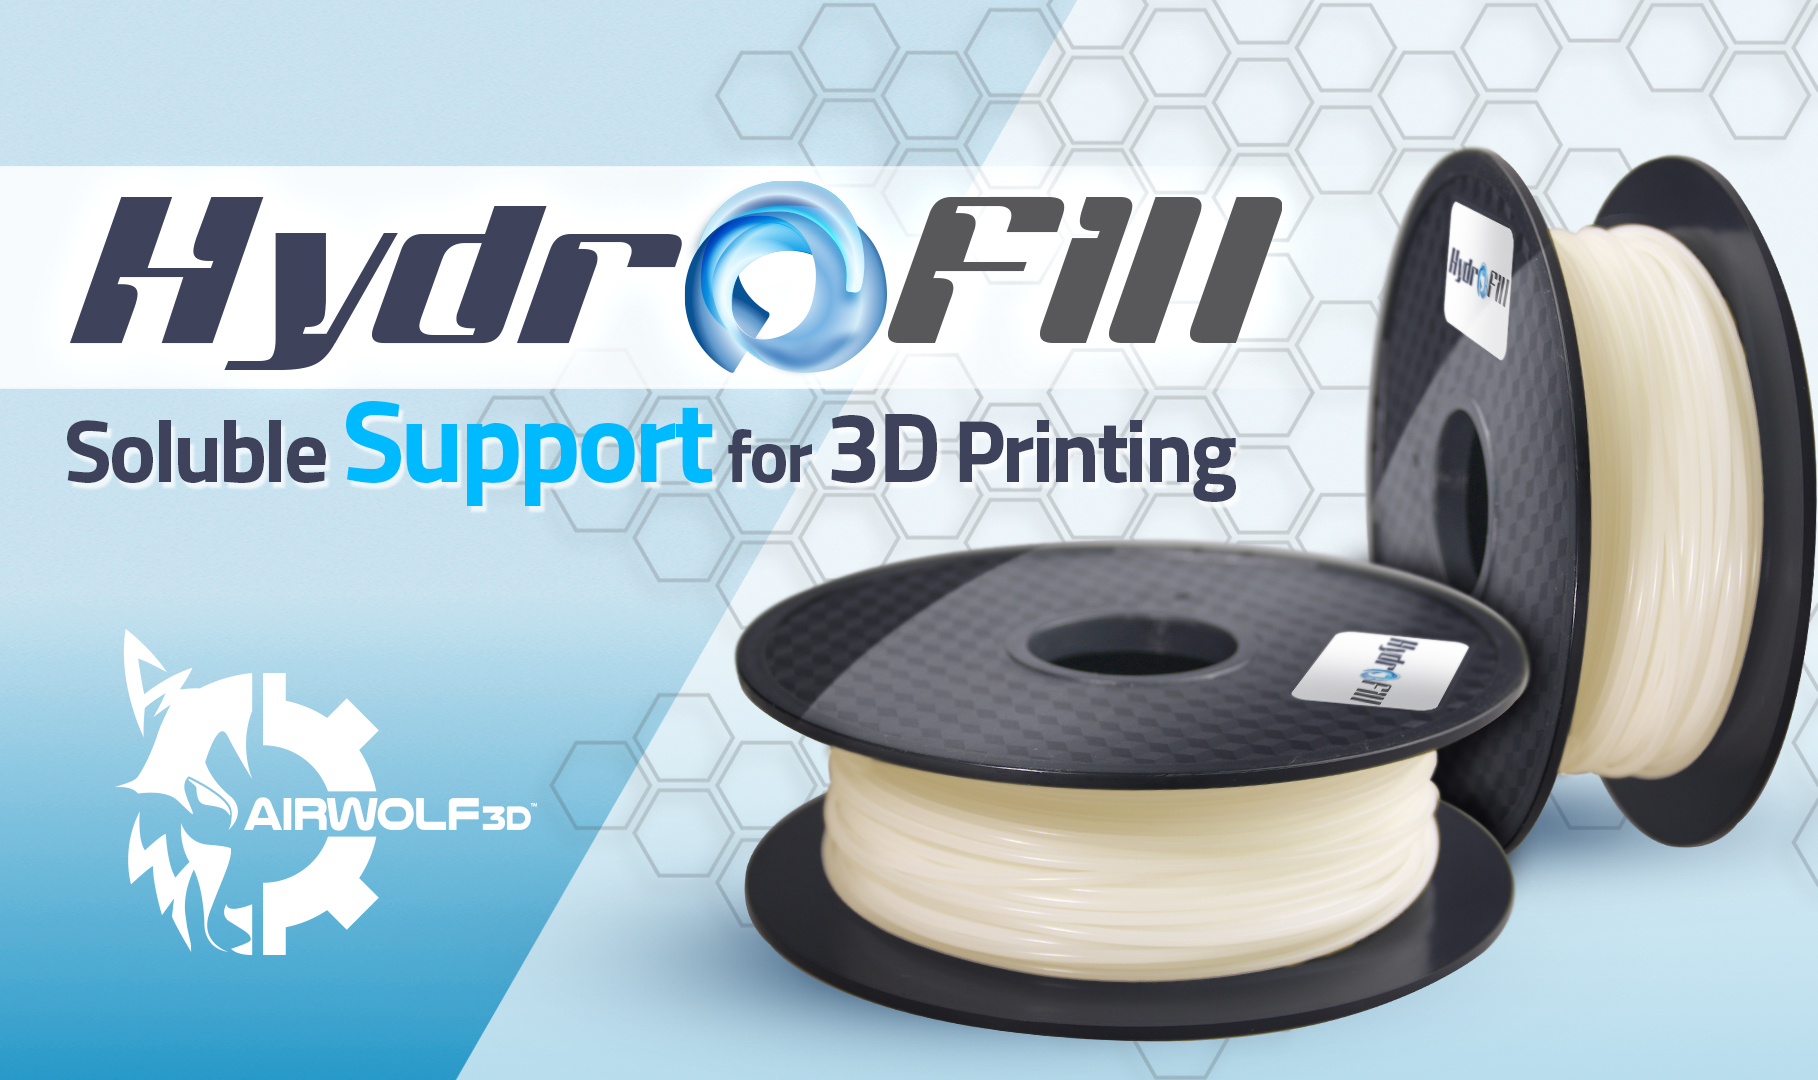 HydroFill Water-Soluble Support is the world's first filament that acts as a highly effective support material for large ABS parts and still dissolves easily in plain water.